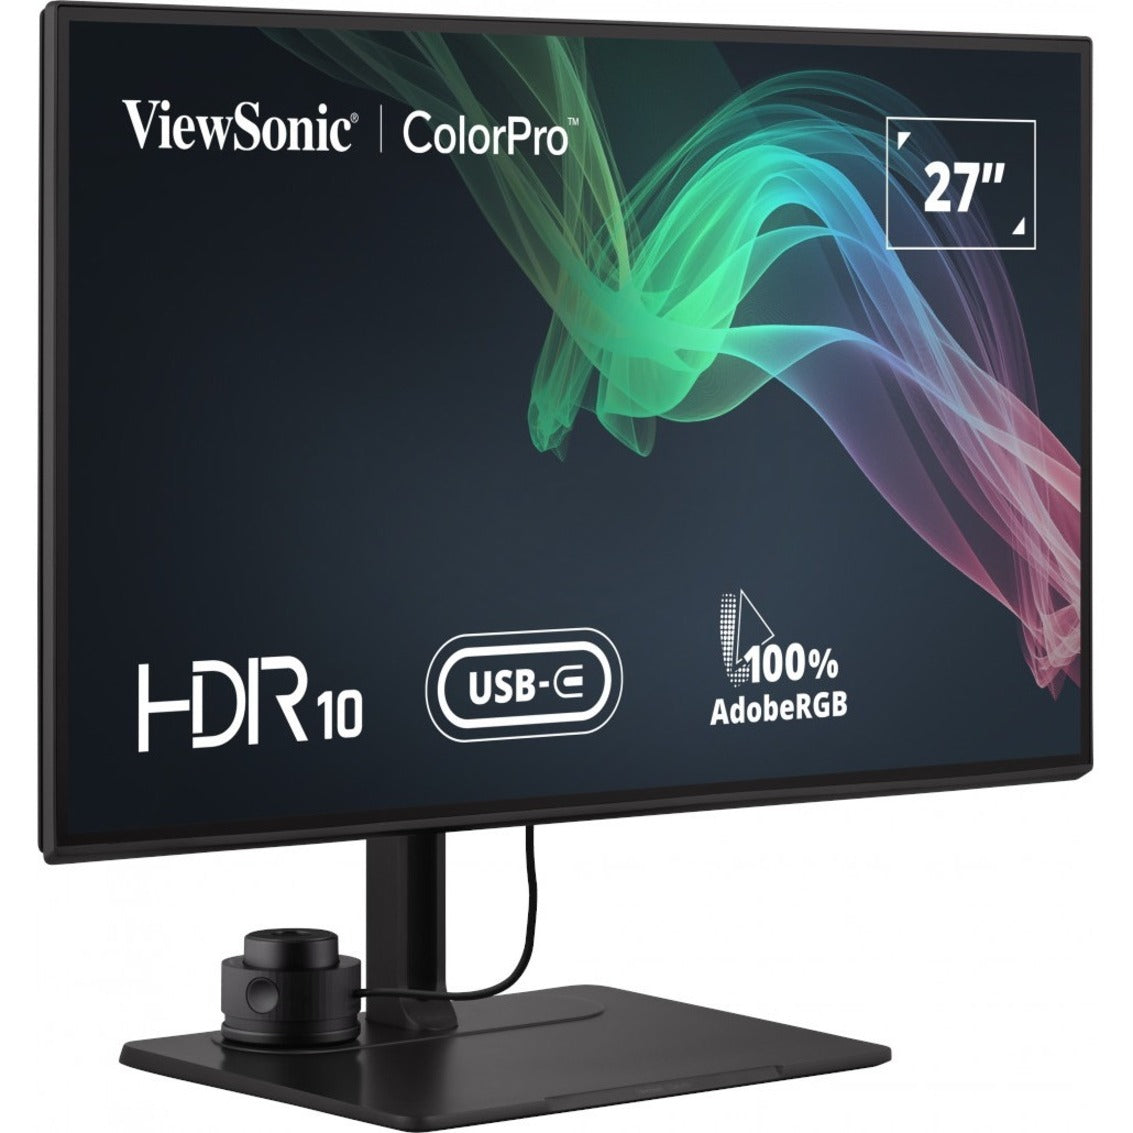 ViewSonic VP2786-4K 27 Inch Premium IPS 4K USB C Monitor with Integrated Color Wheel 100% Adobe RGB 98% DCI-P3 Pantone Validated 90W Charging HDMI DisplayPort for Professional Home and Office